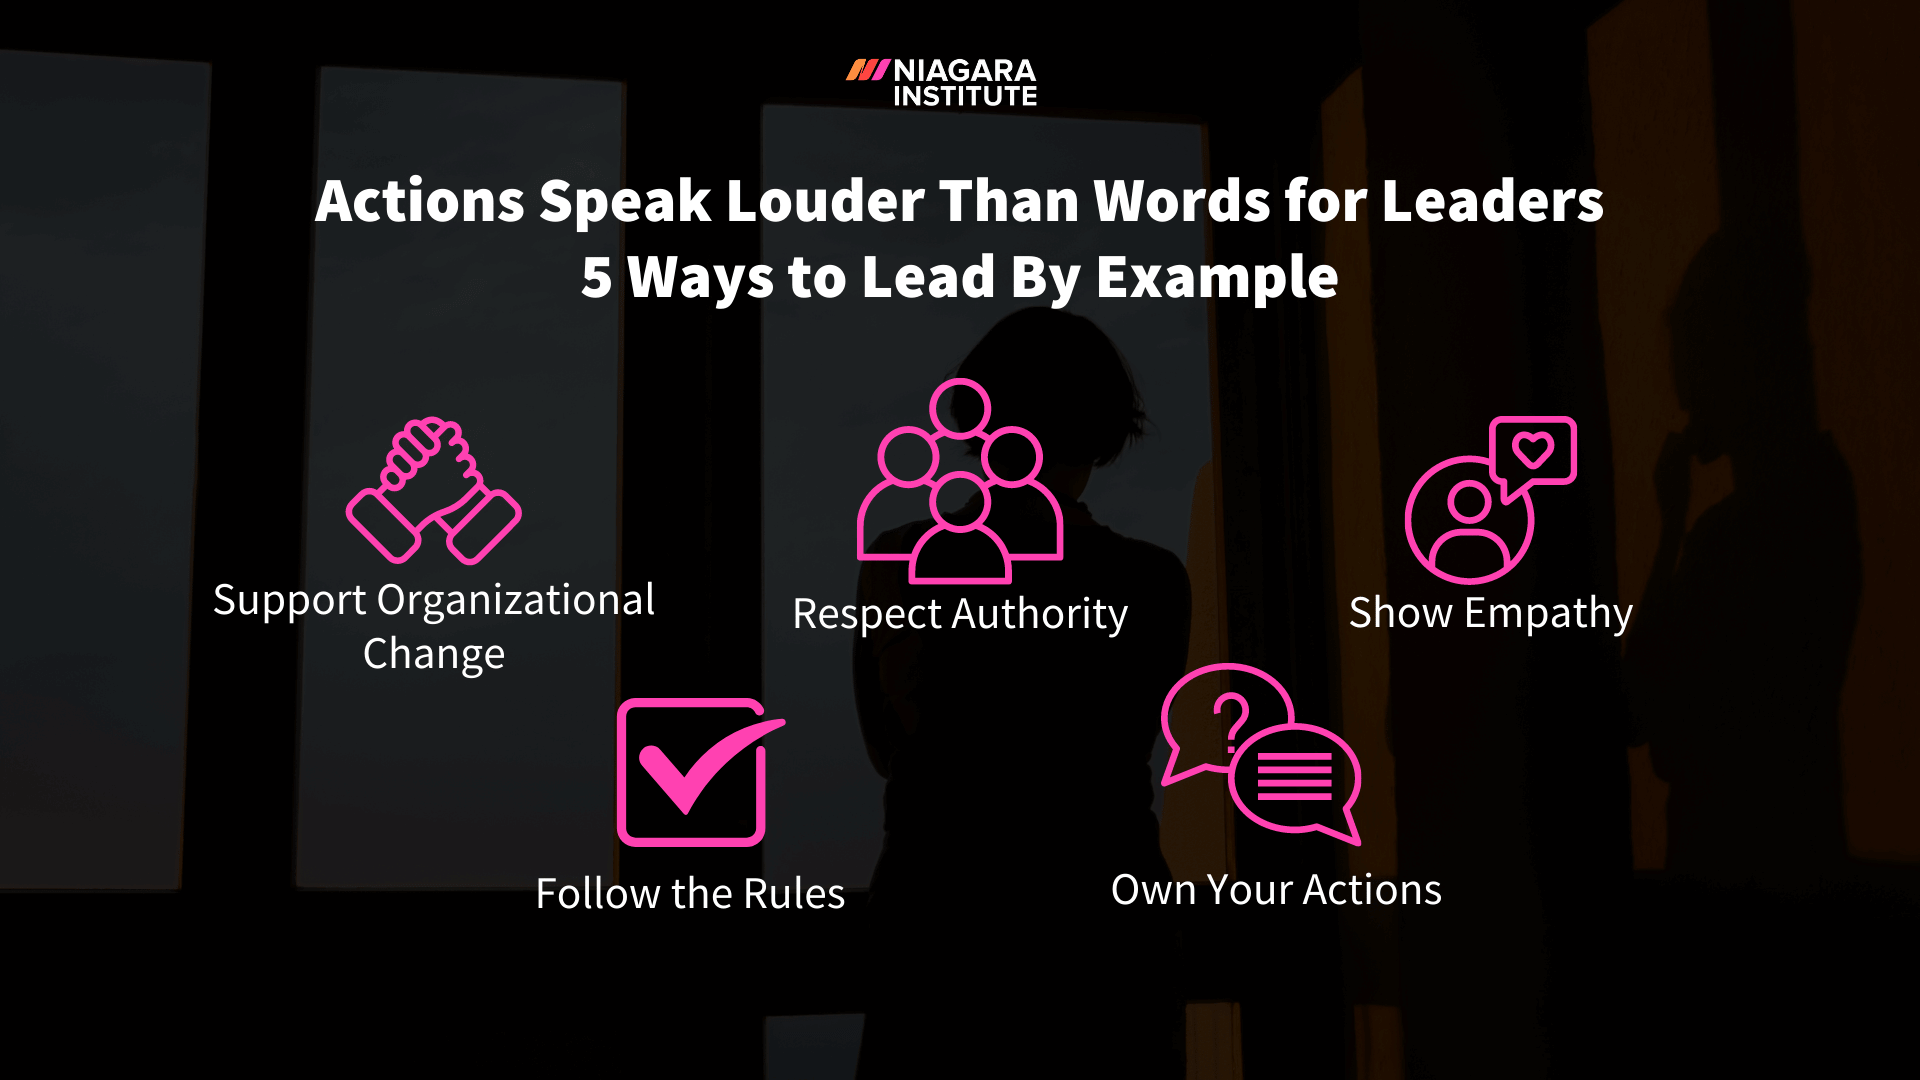 Actions speak louder than words for leaders - 5 ways to lead by example - Niagara Institute (1)